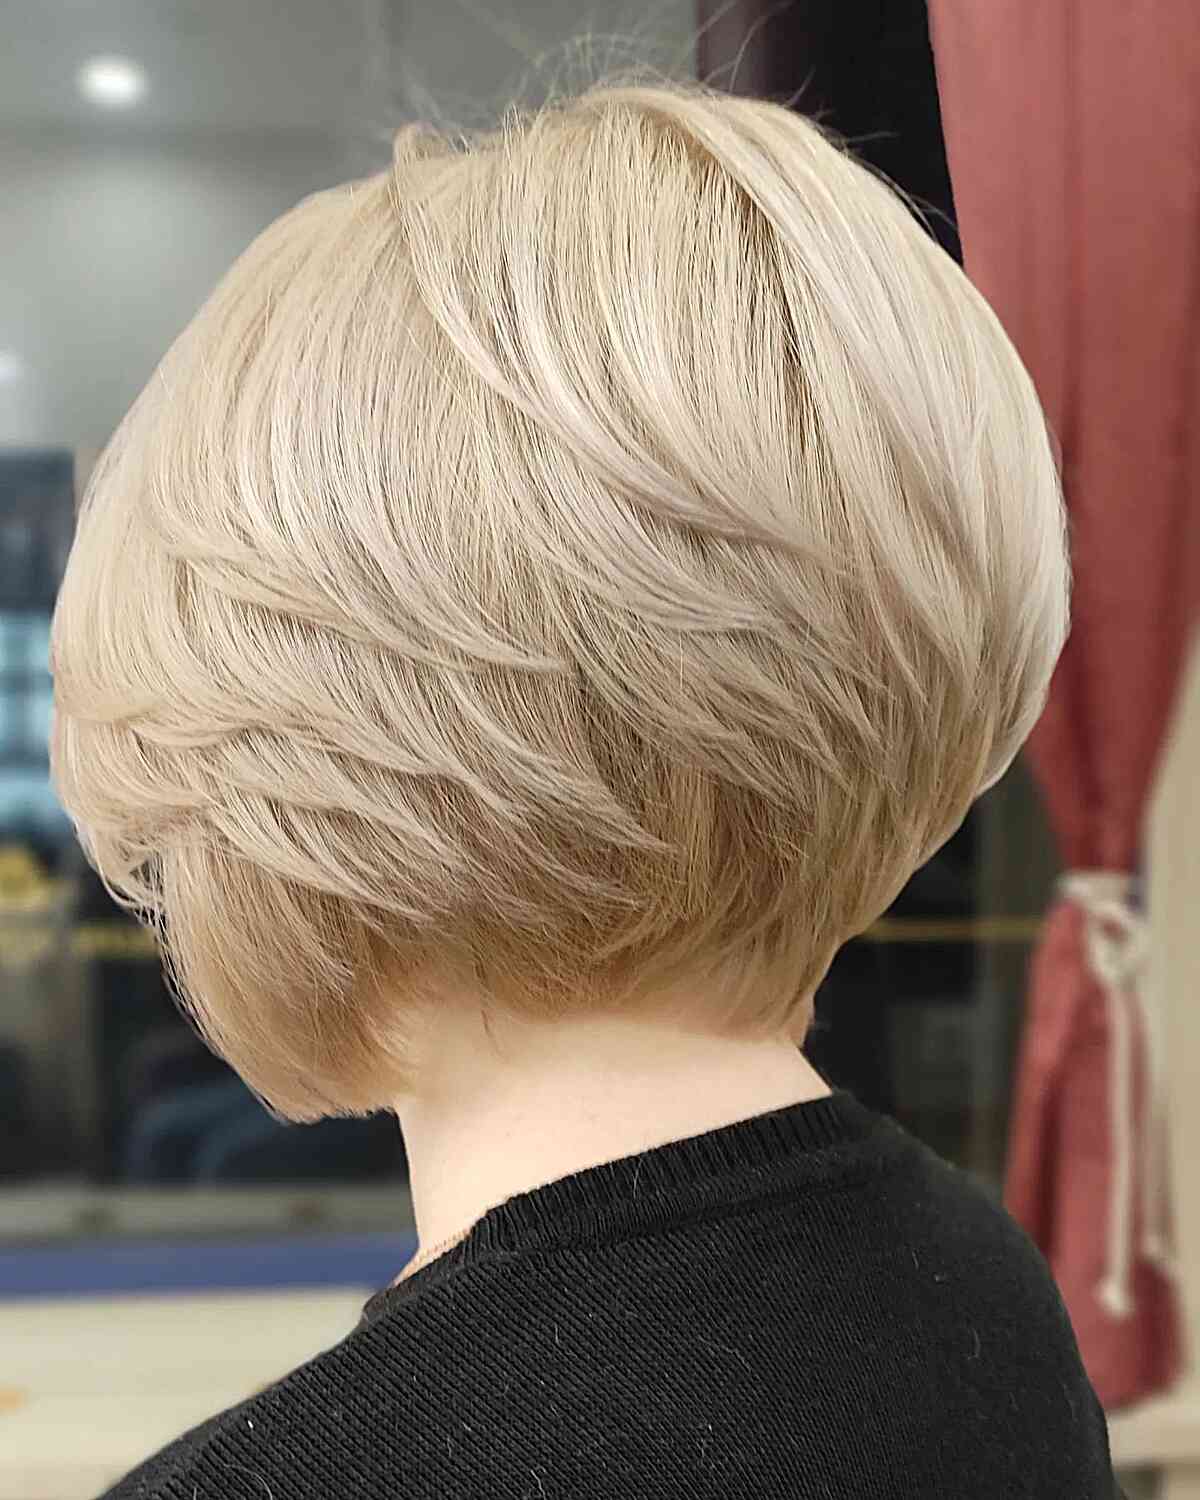 Straight Short Feathered Bob Cut with layers on blonde hair cut at the nape